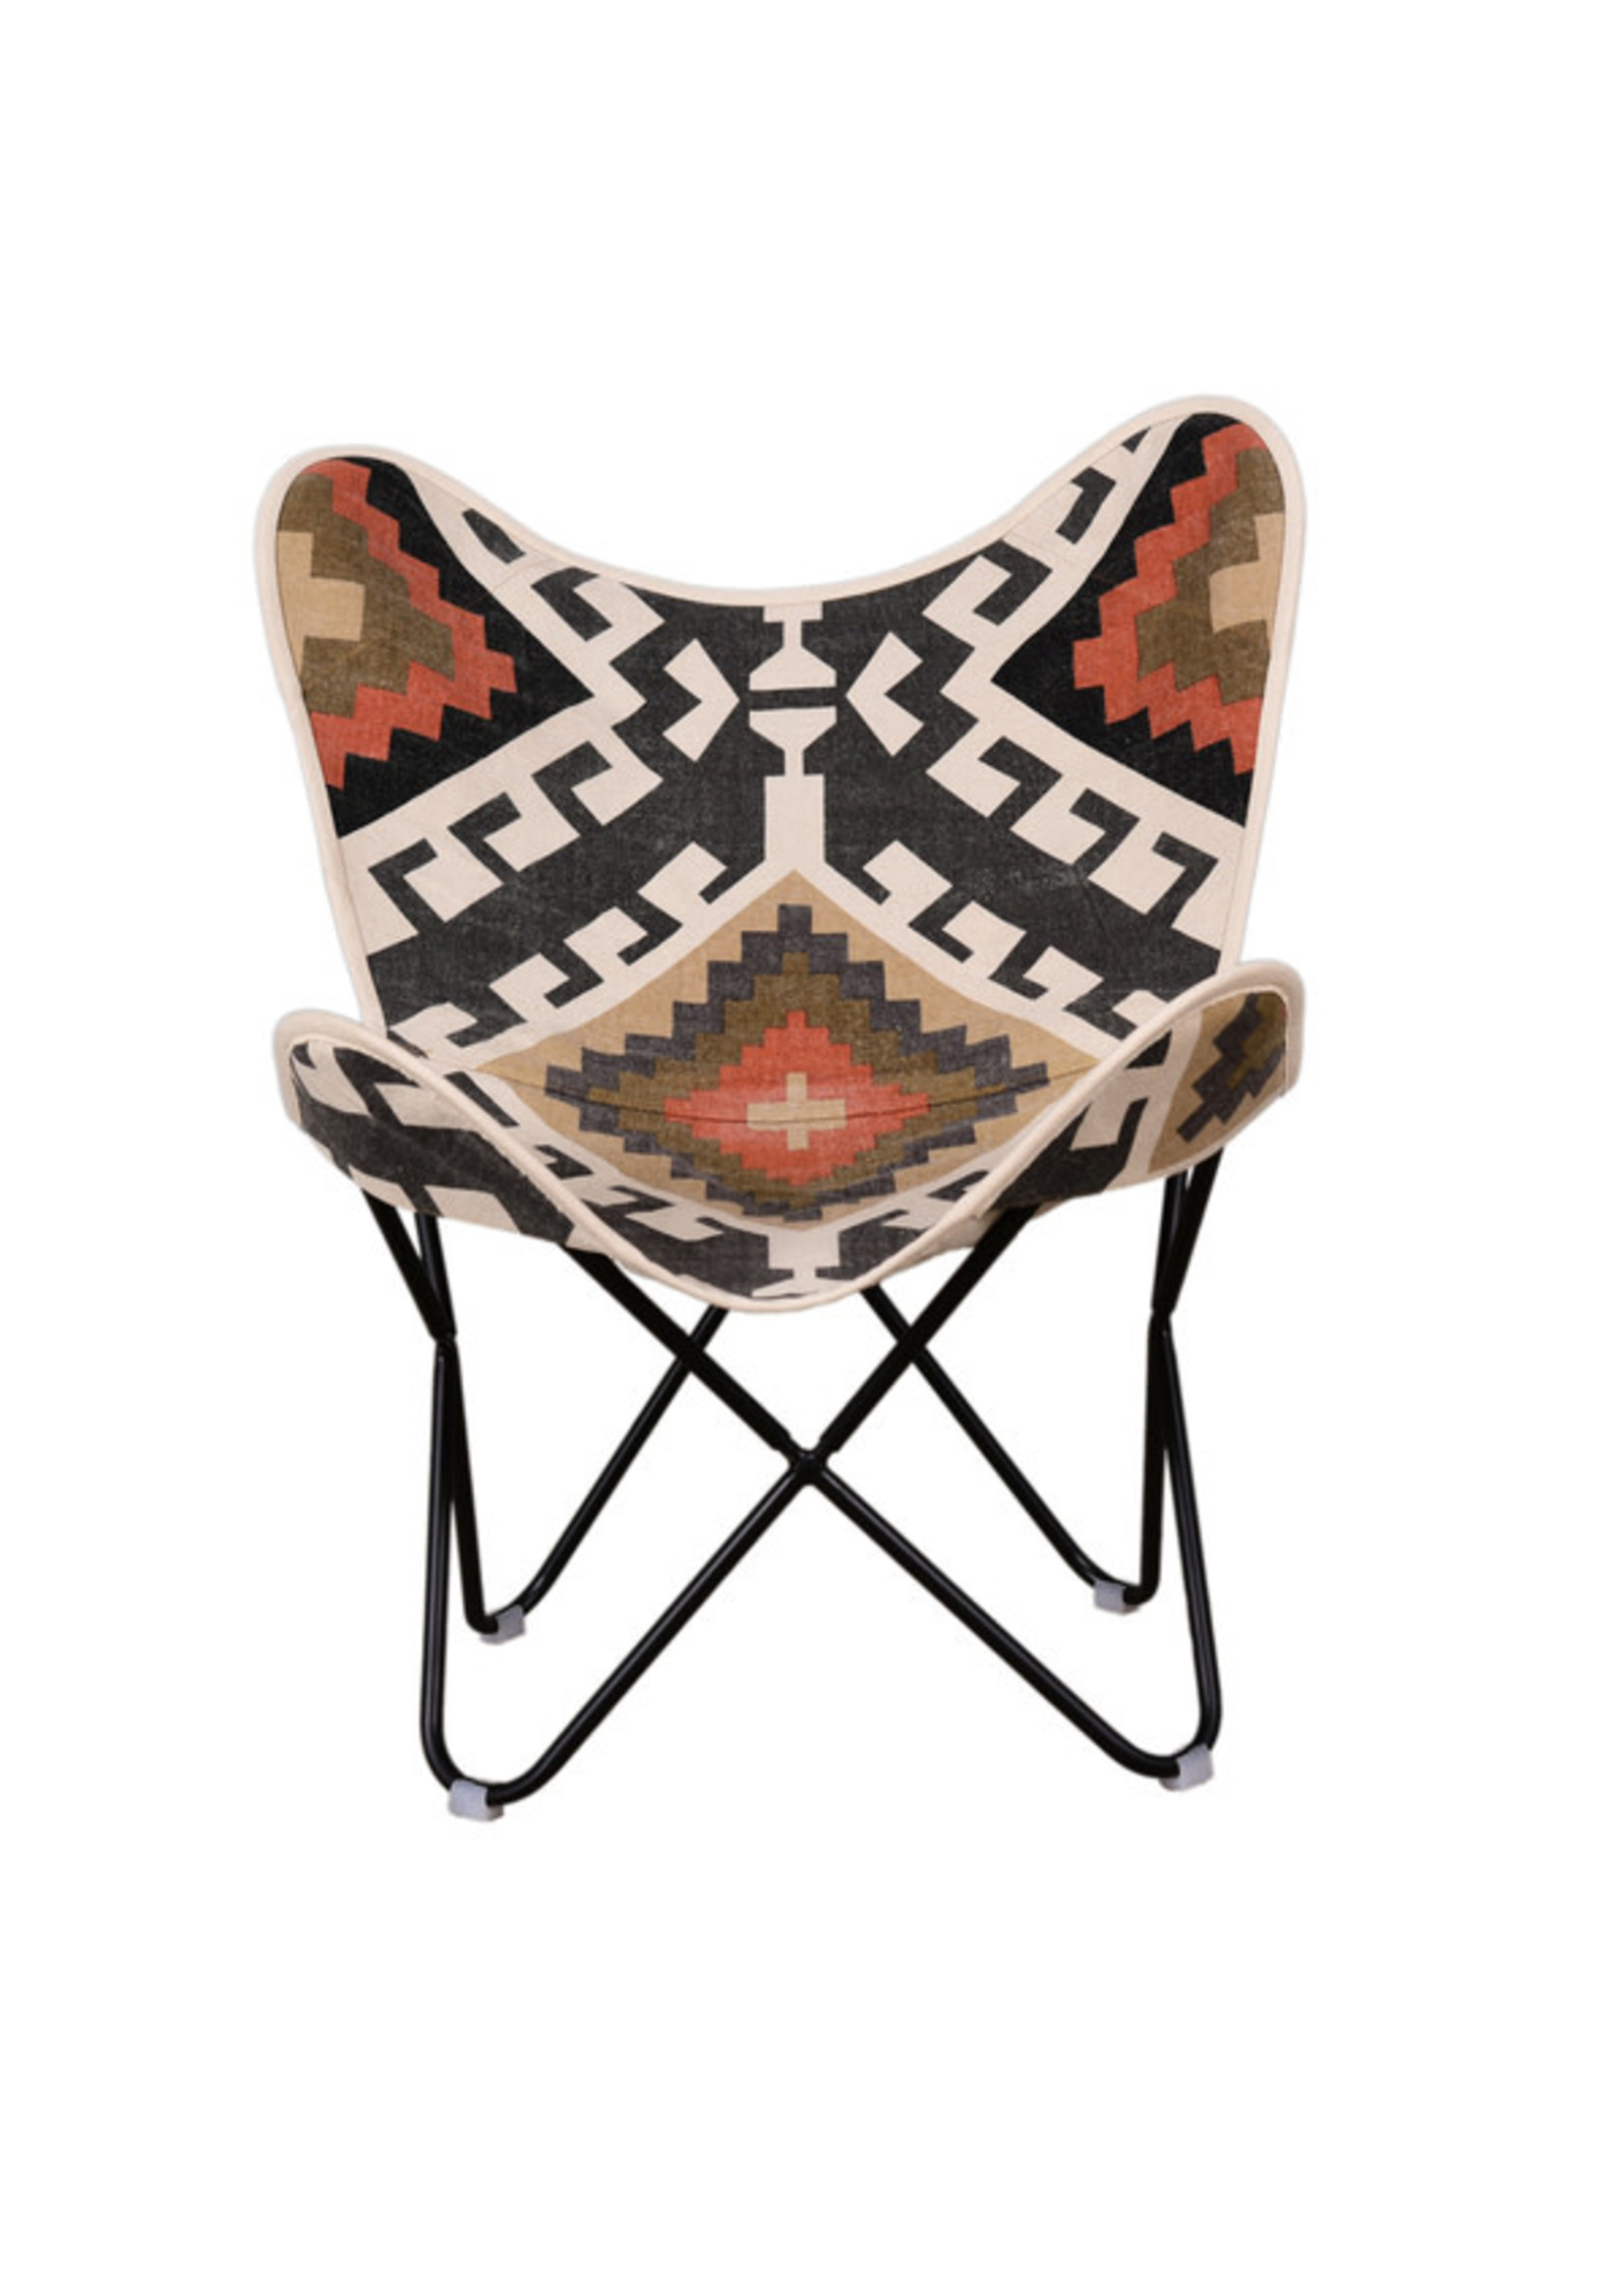 LR Home LR Home Butterfly Chair Aztec Weave Print